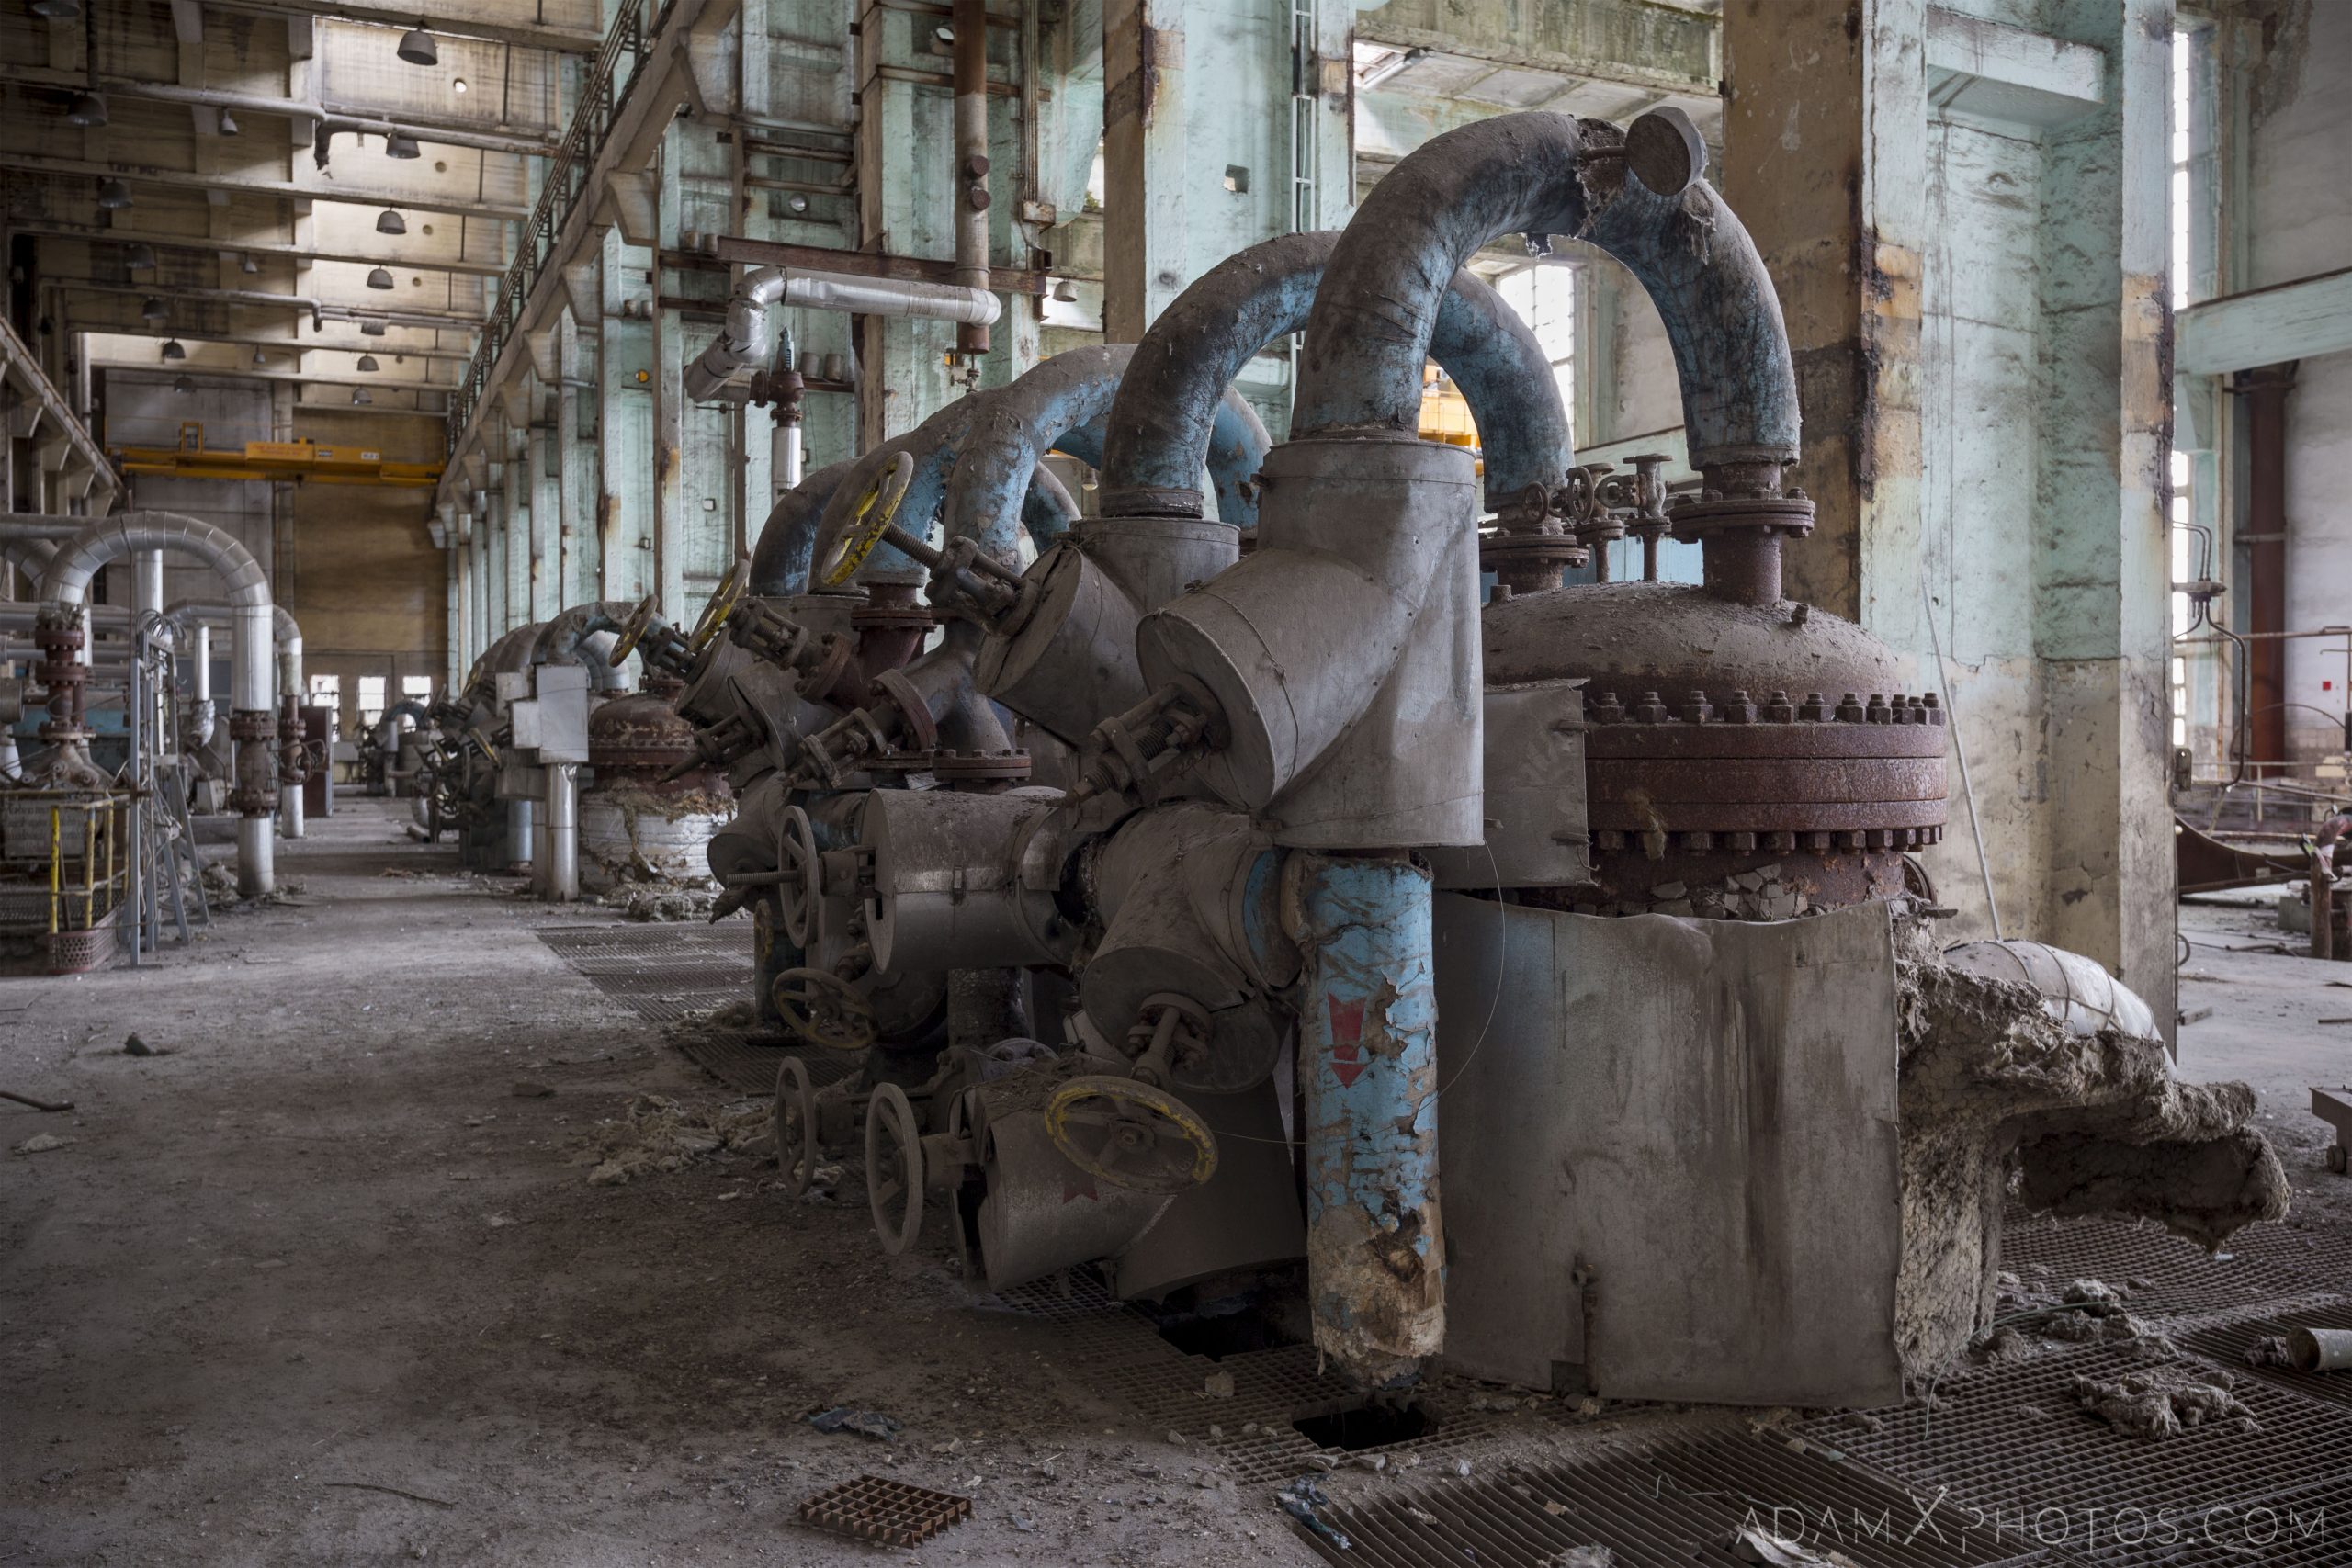 turbine hall pipes industry industrial rusty rusting Bladerunner Blade Runner 2049 Powerplant Inota Shephard's Power Plant Hungary Adam X Urbex Urban Exploration Access 2018 Abandoned decay ruins lost forgotten derelict location creepy haunting eerie security